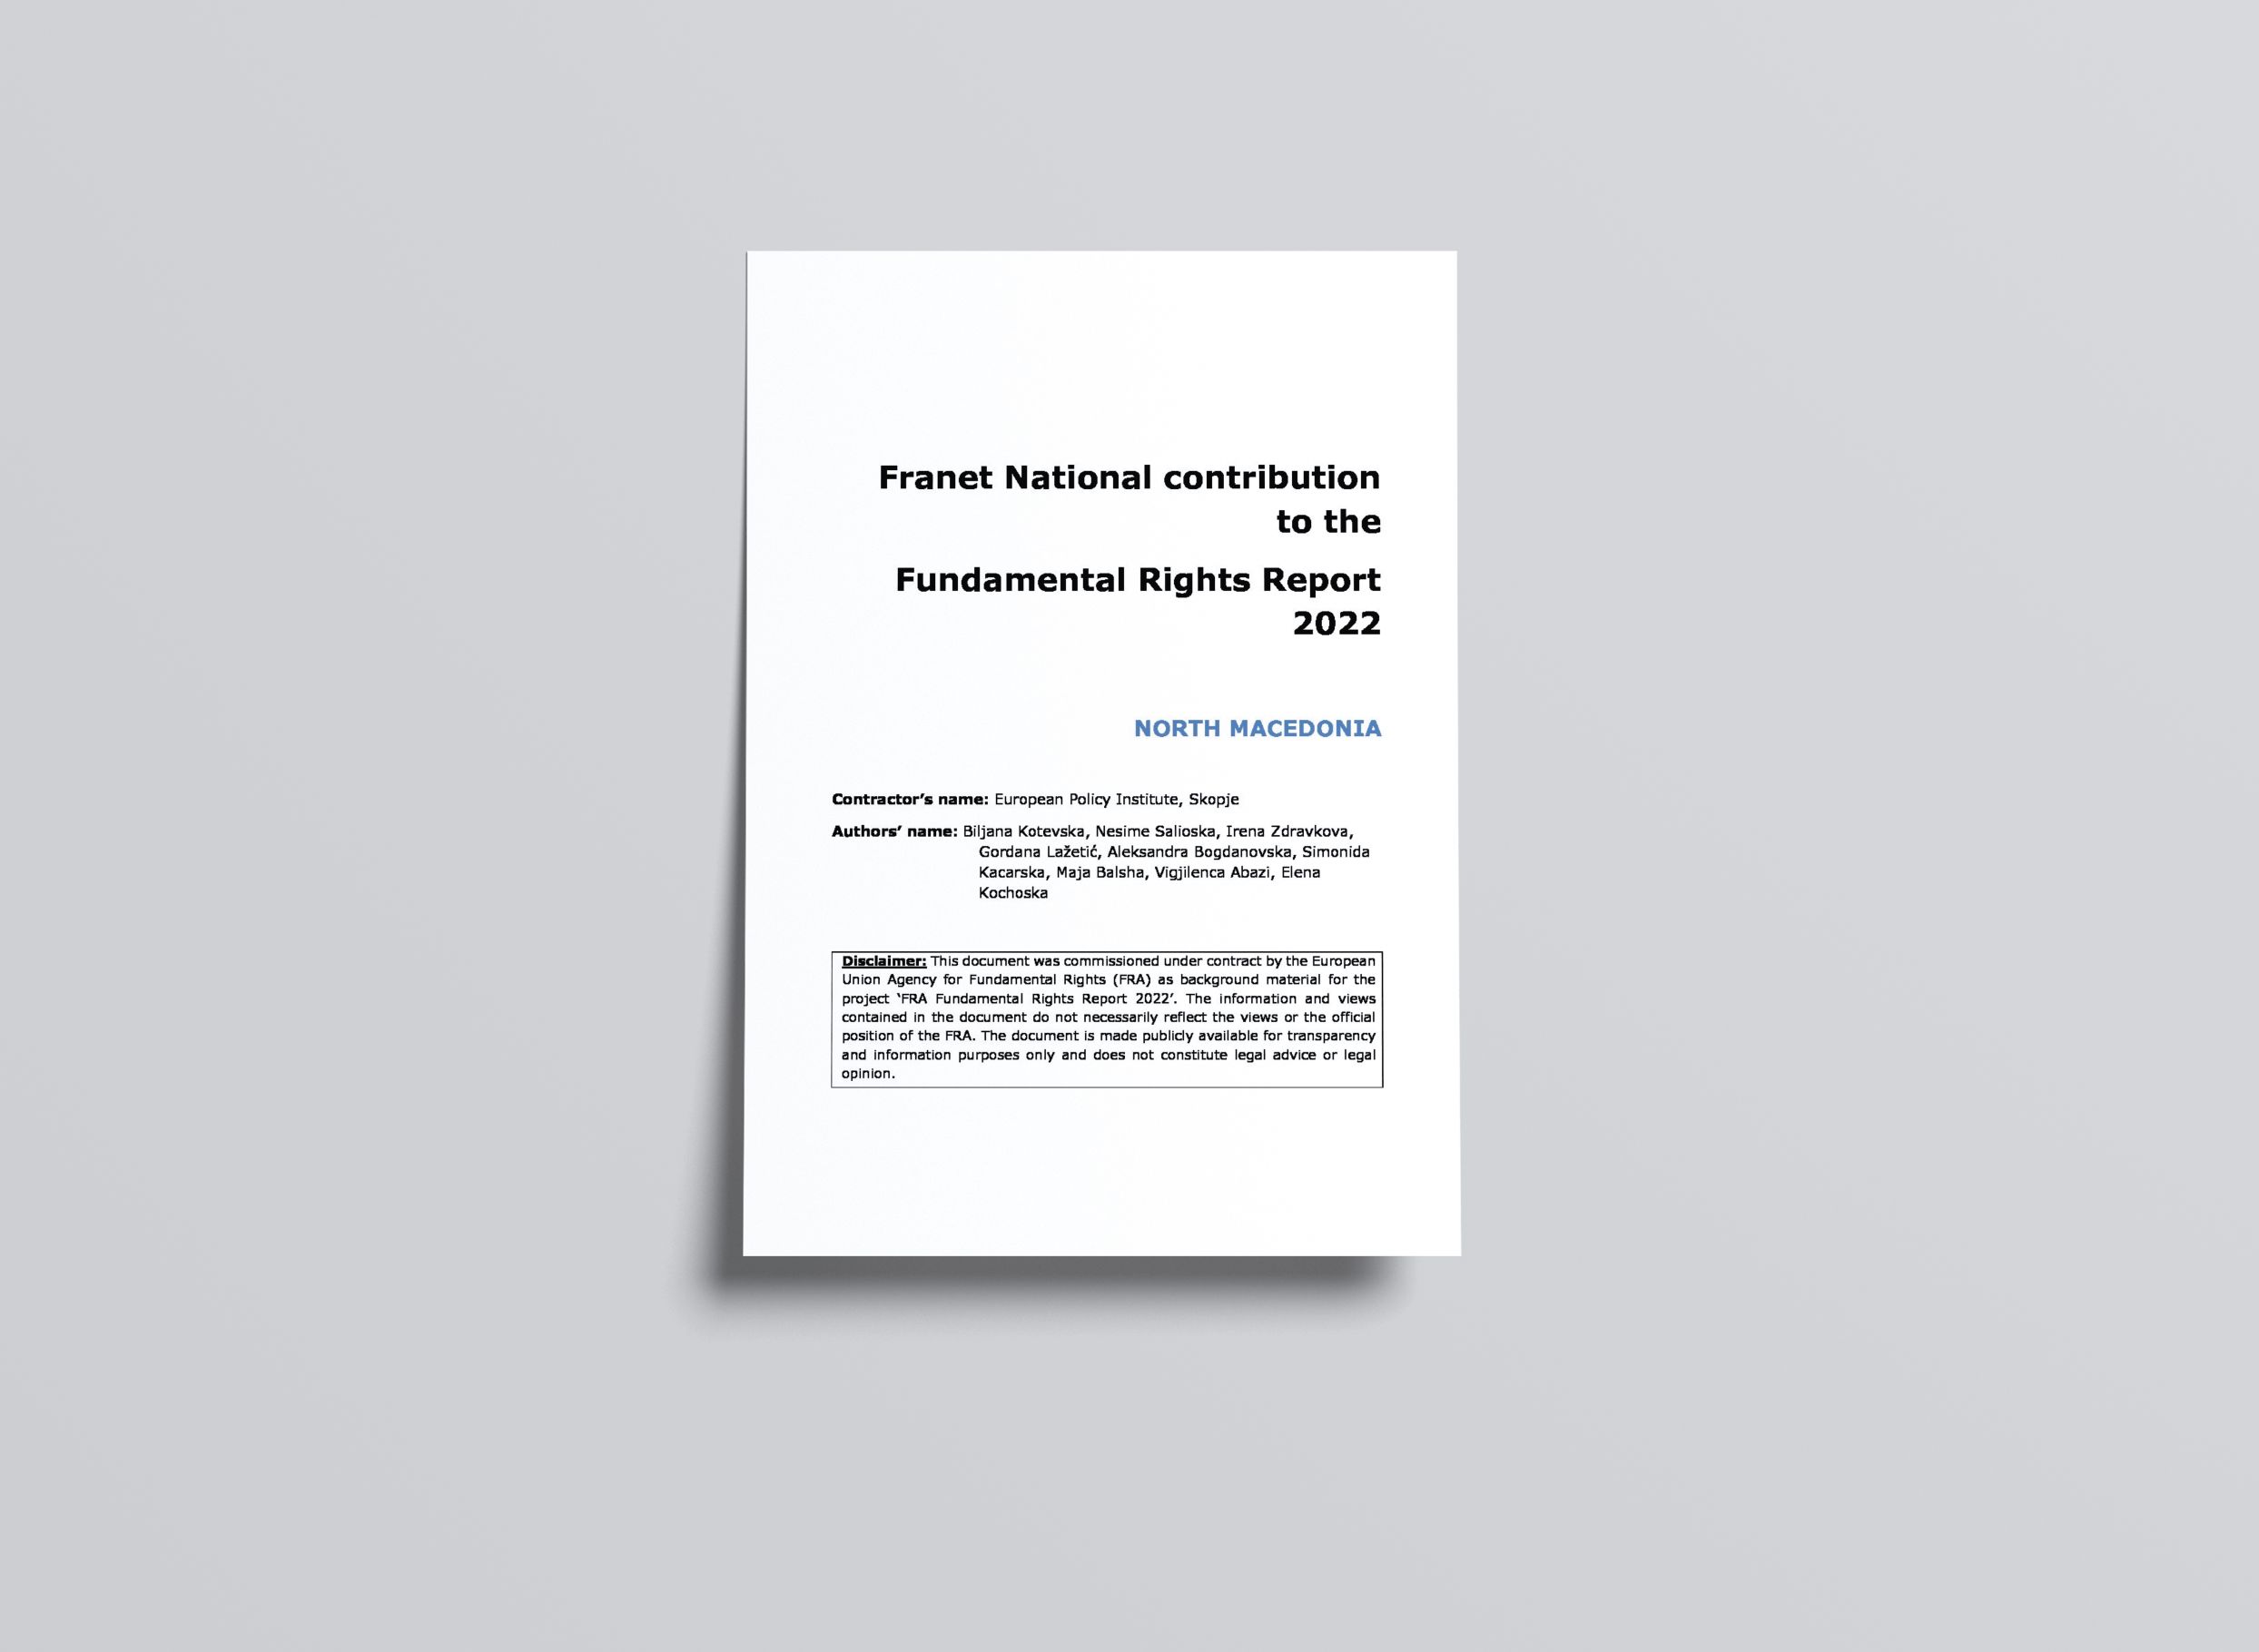 Franet National contribution to the Fundamental Rights Report 2022 – North Macedonia